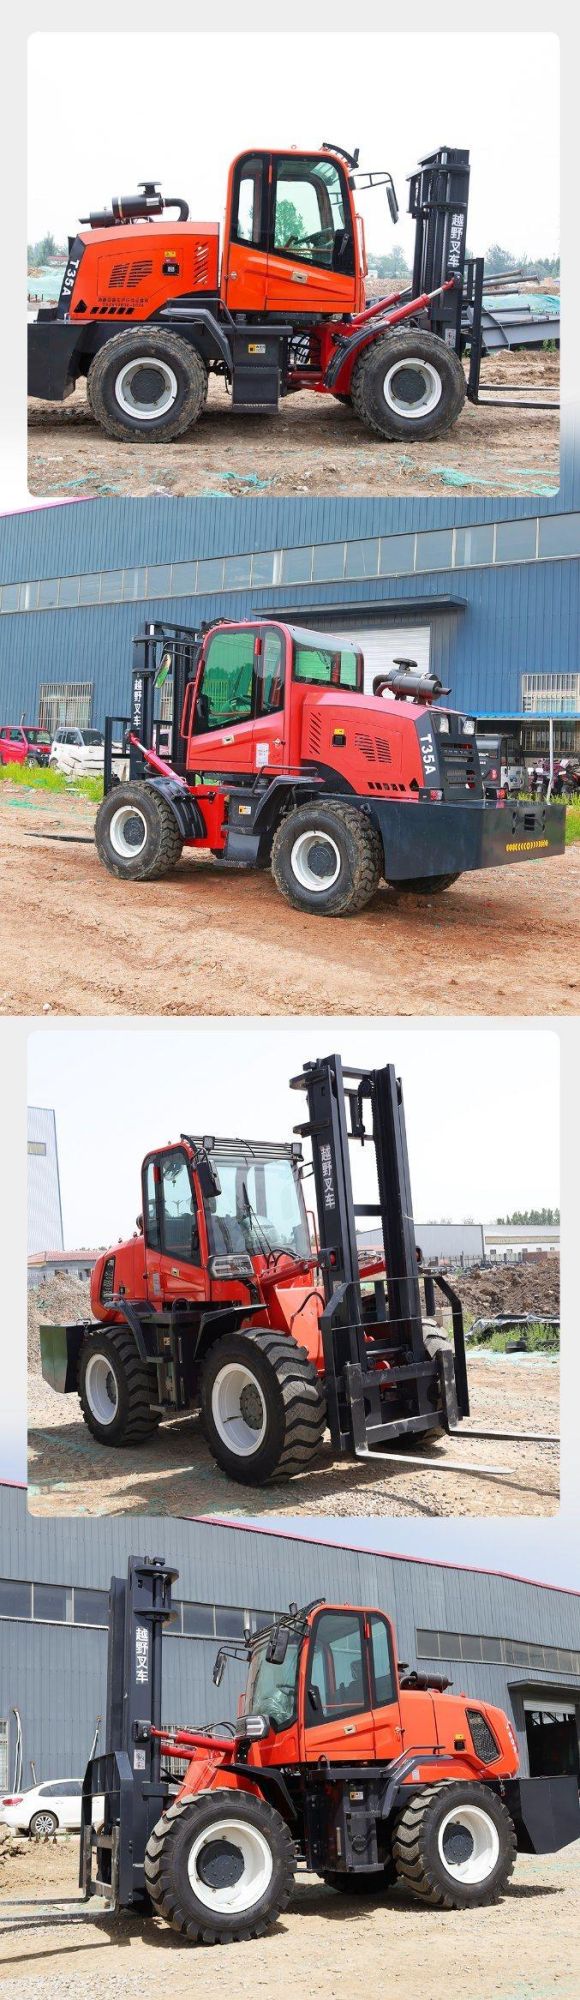 Chinese Hot Sale 4WD All Terrain Forklift 4X4 off-Road Forklift 3.5 Ton 3 Ton Mini Rough Terrain Forklift